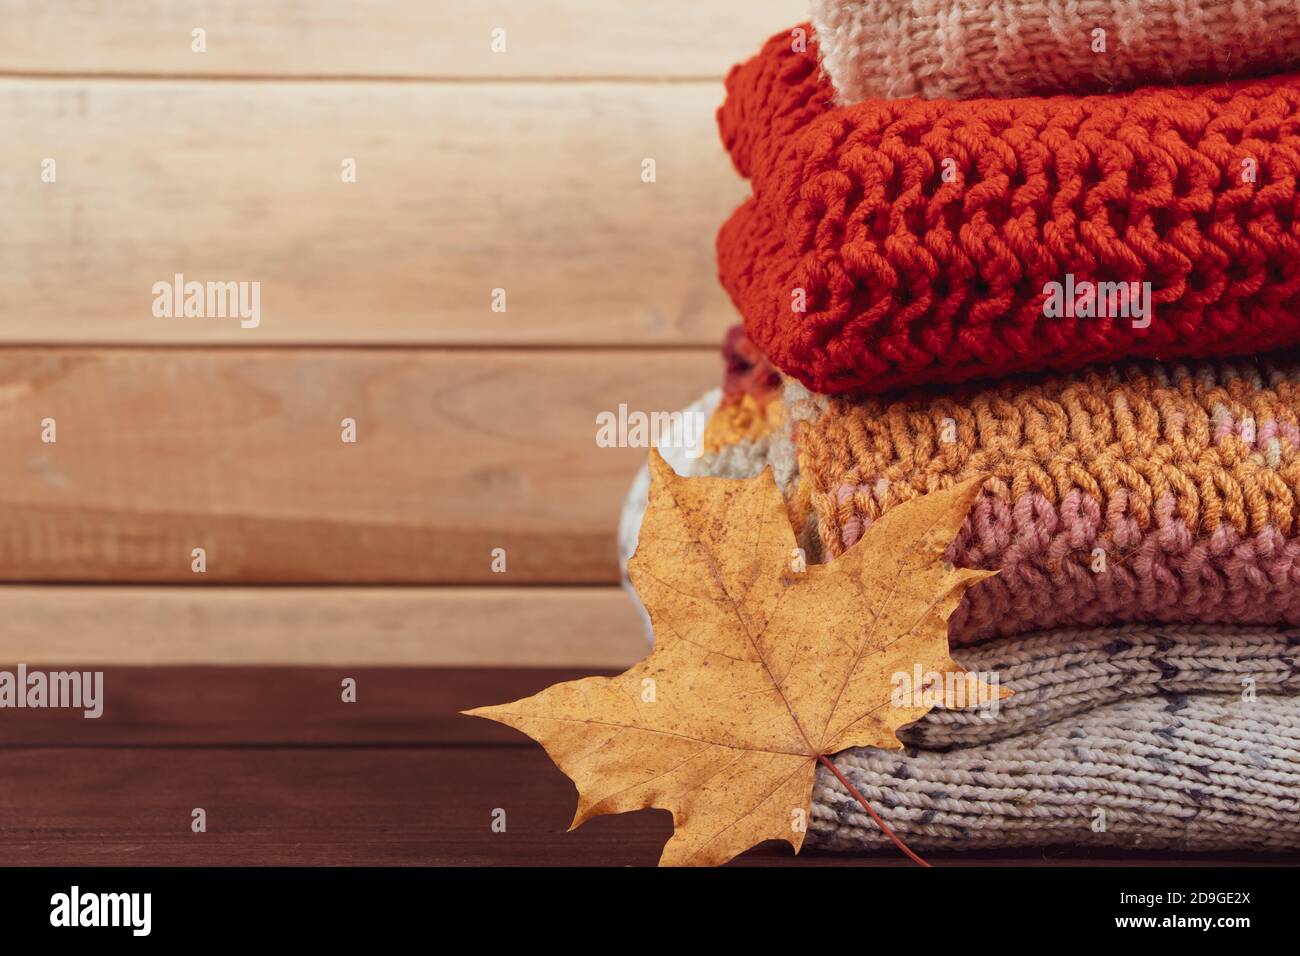 Stack of warm knitted sweaters. Autumn concept. Woolen jumpers and maple leaf on wooden background. Stock Photo